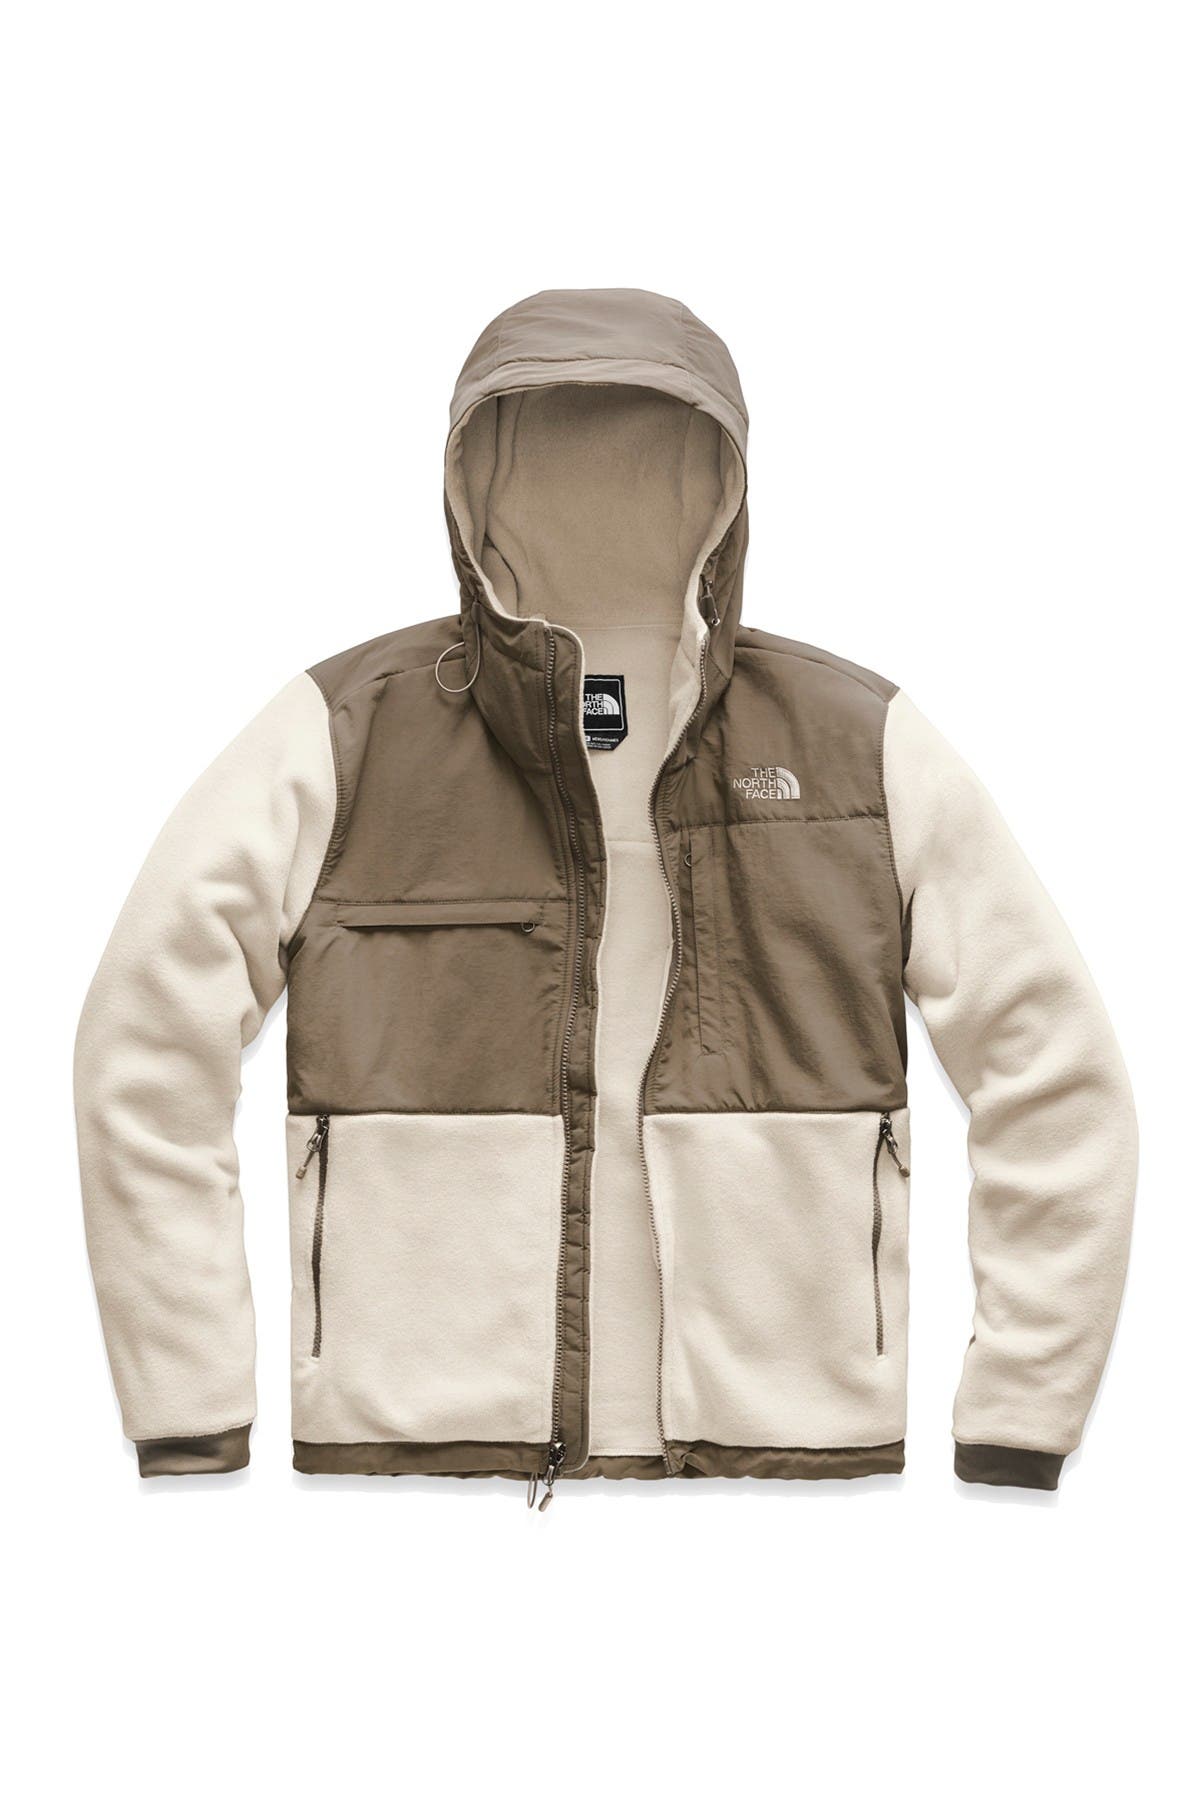 nordstrom rack womens north face